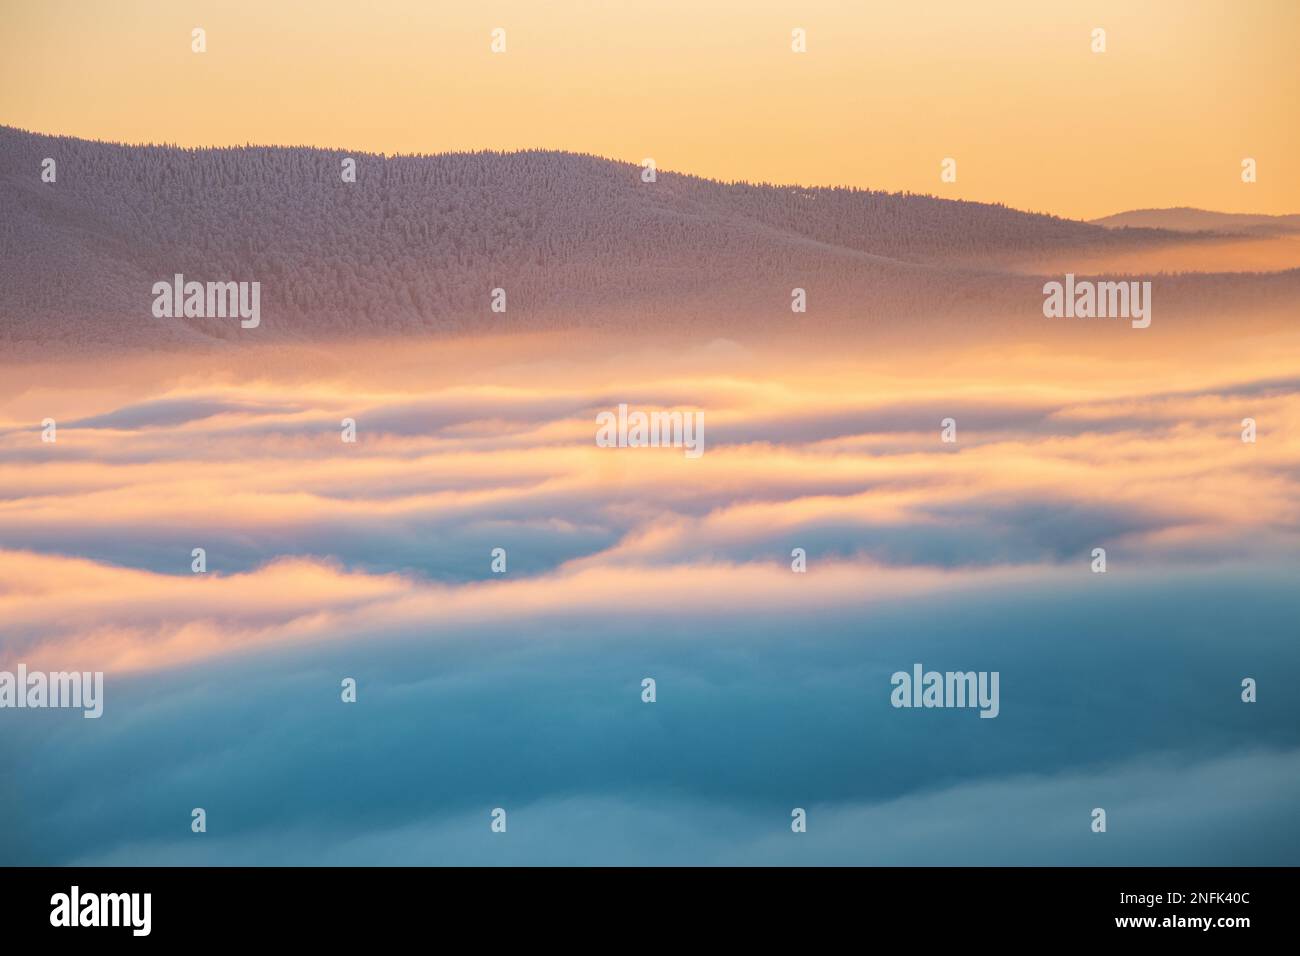 View of sea of clouds colored in the soft orange-pink hue of the morning sun. Peaks of the mountains rising out of this impermeable curtain. Sense of Stock Photo